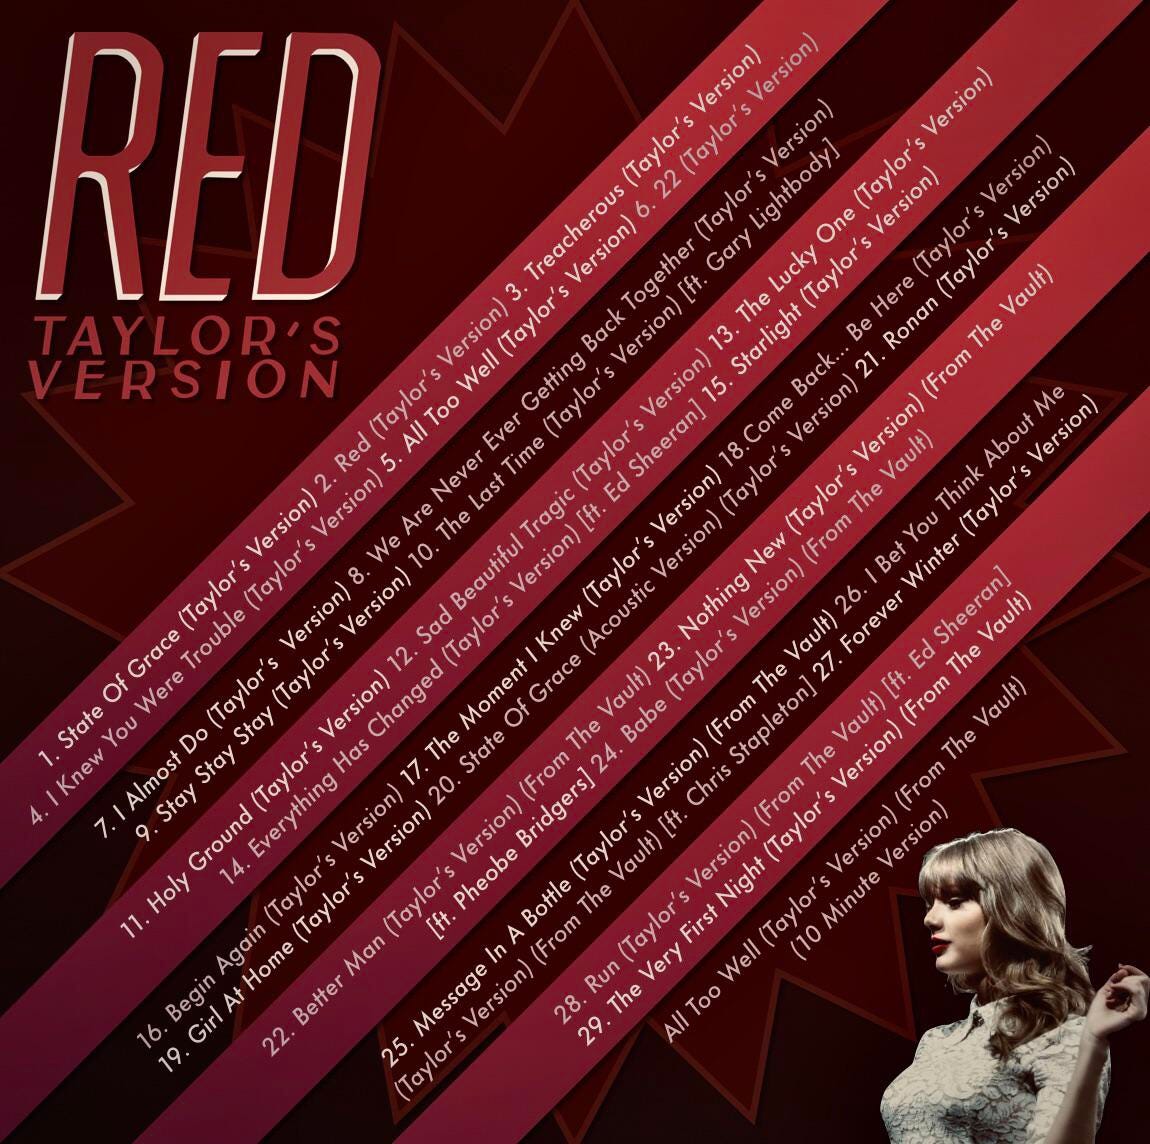 Taylor Swift - Red (Taylor's Version) CD